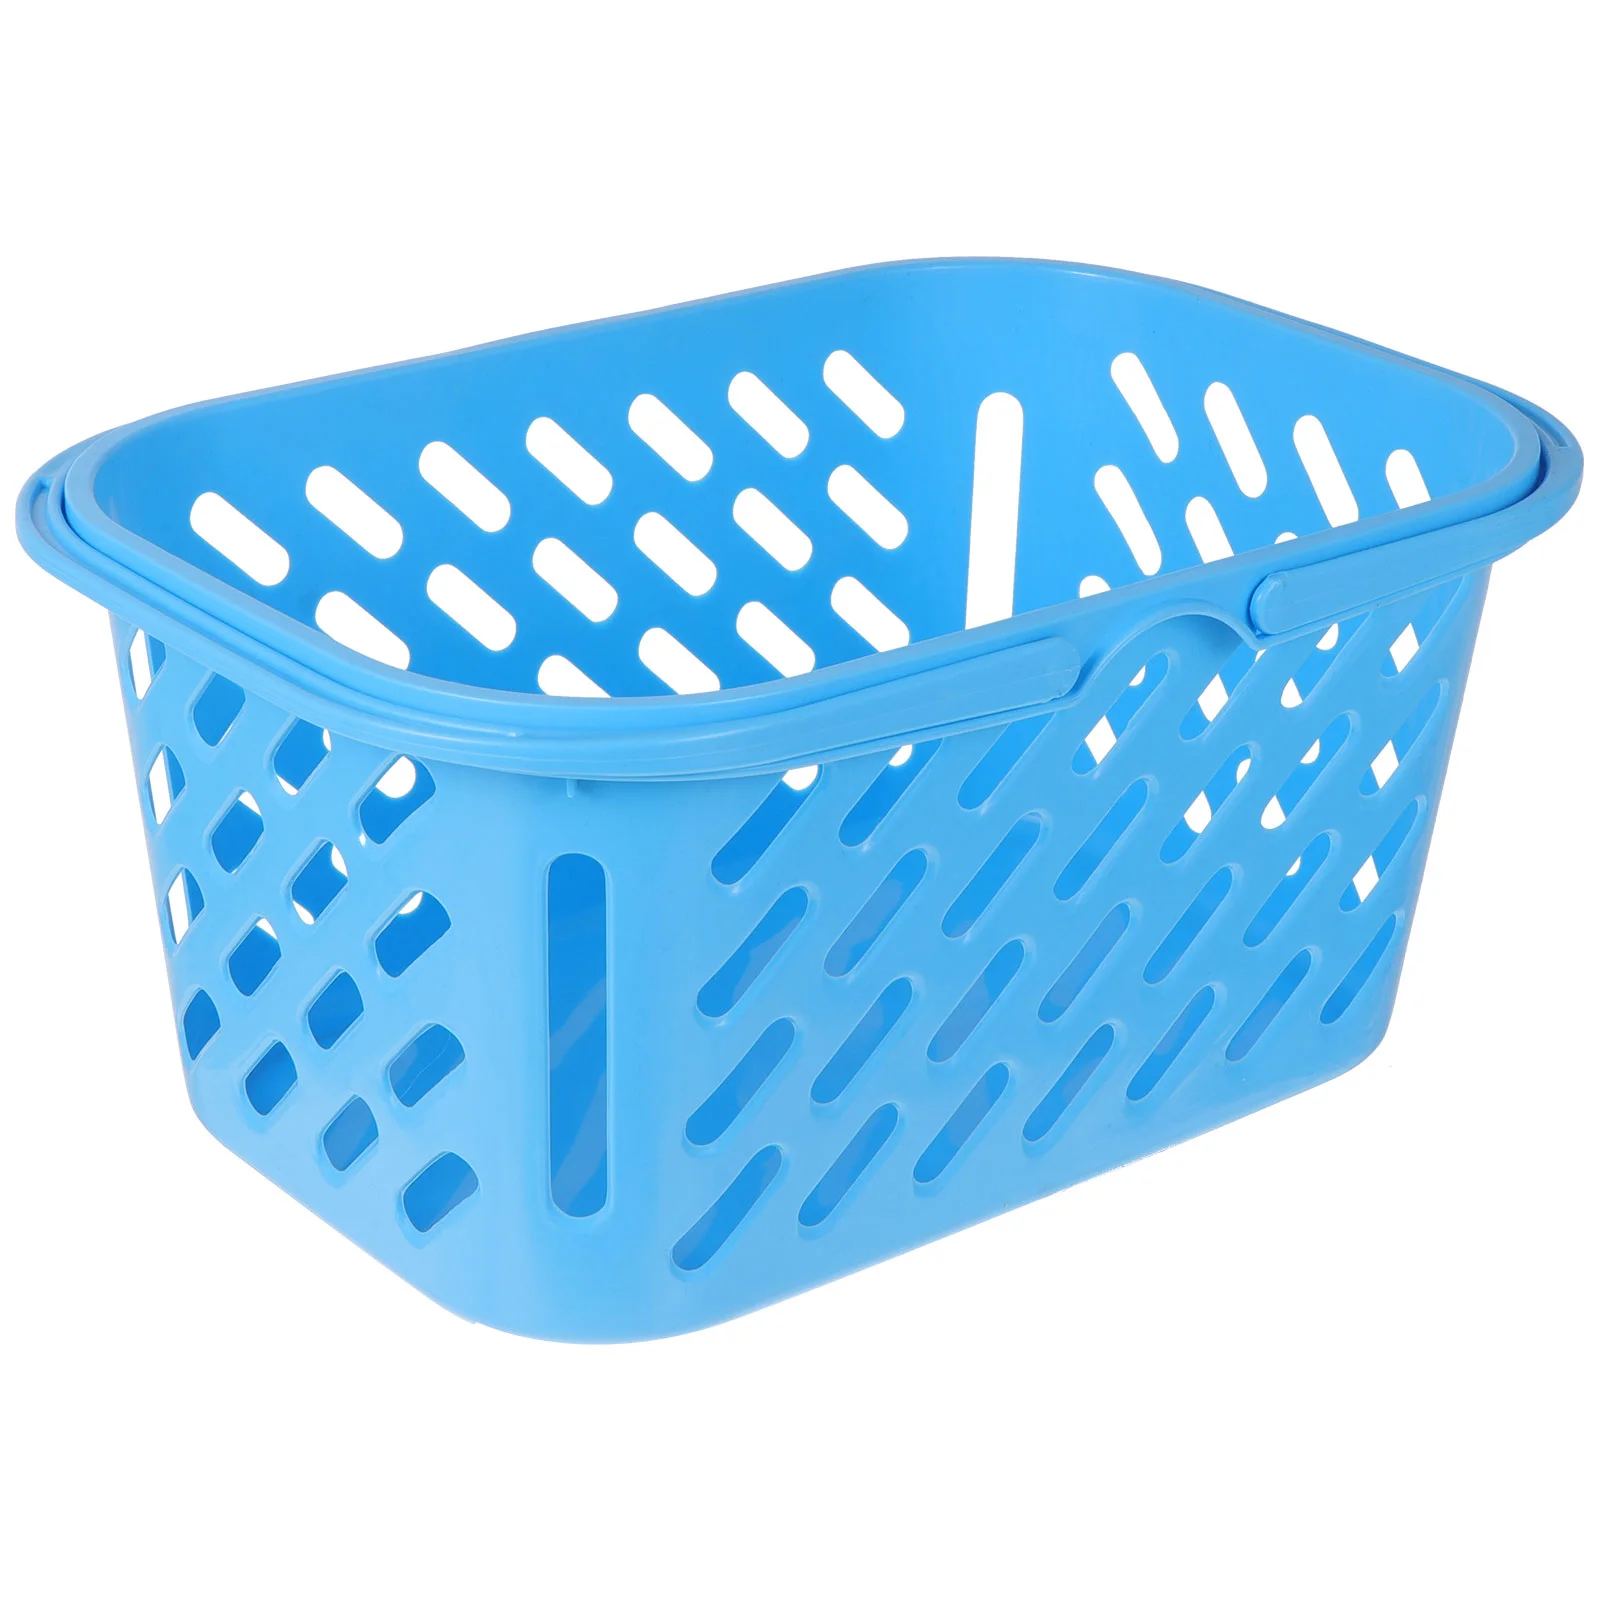 Plastic Baskets Handles Shopping Storage Grocery Fruit Tiny Child Cart Blue Containers Bathroom Organizing Double Sundries